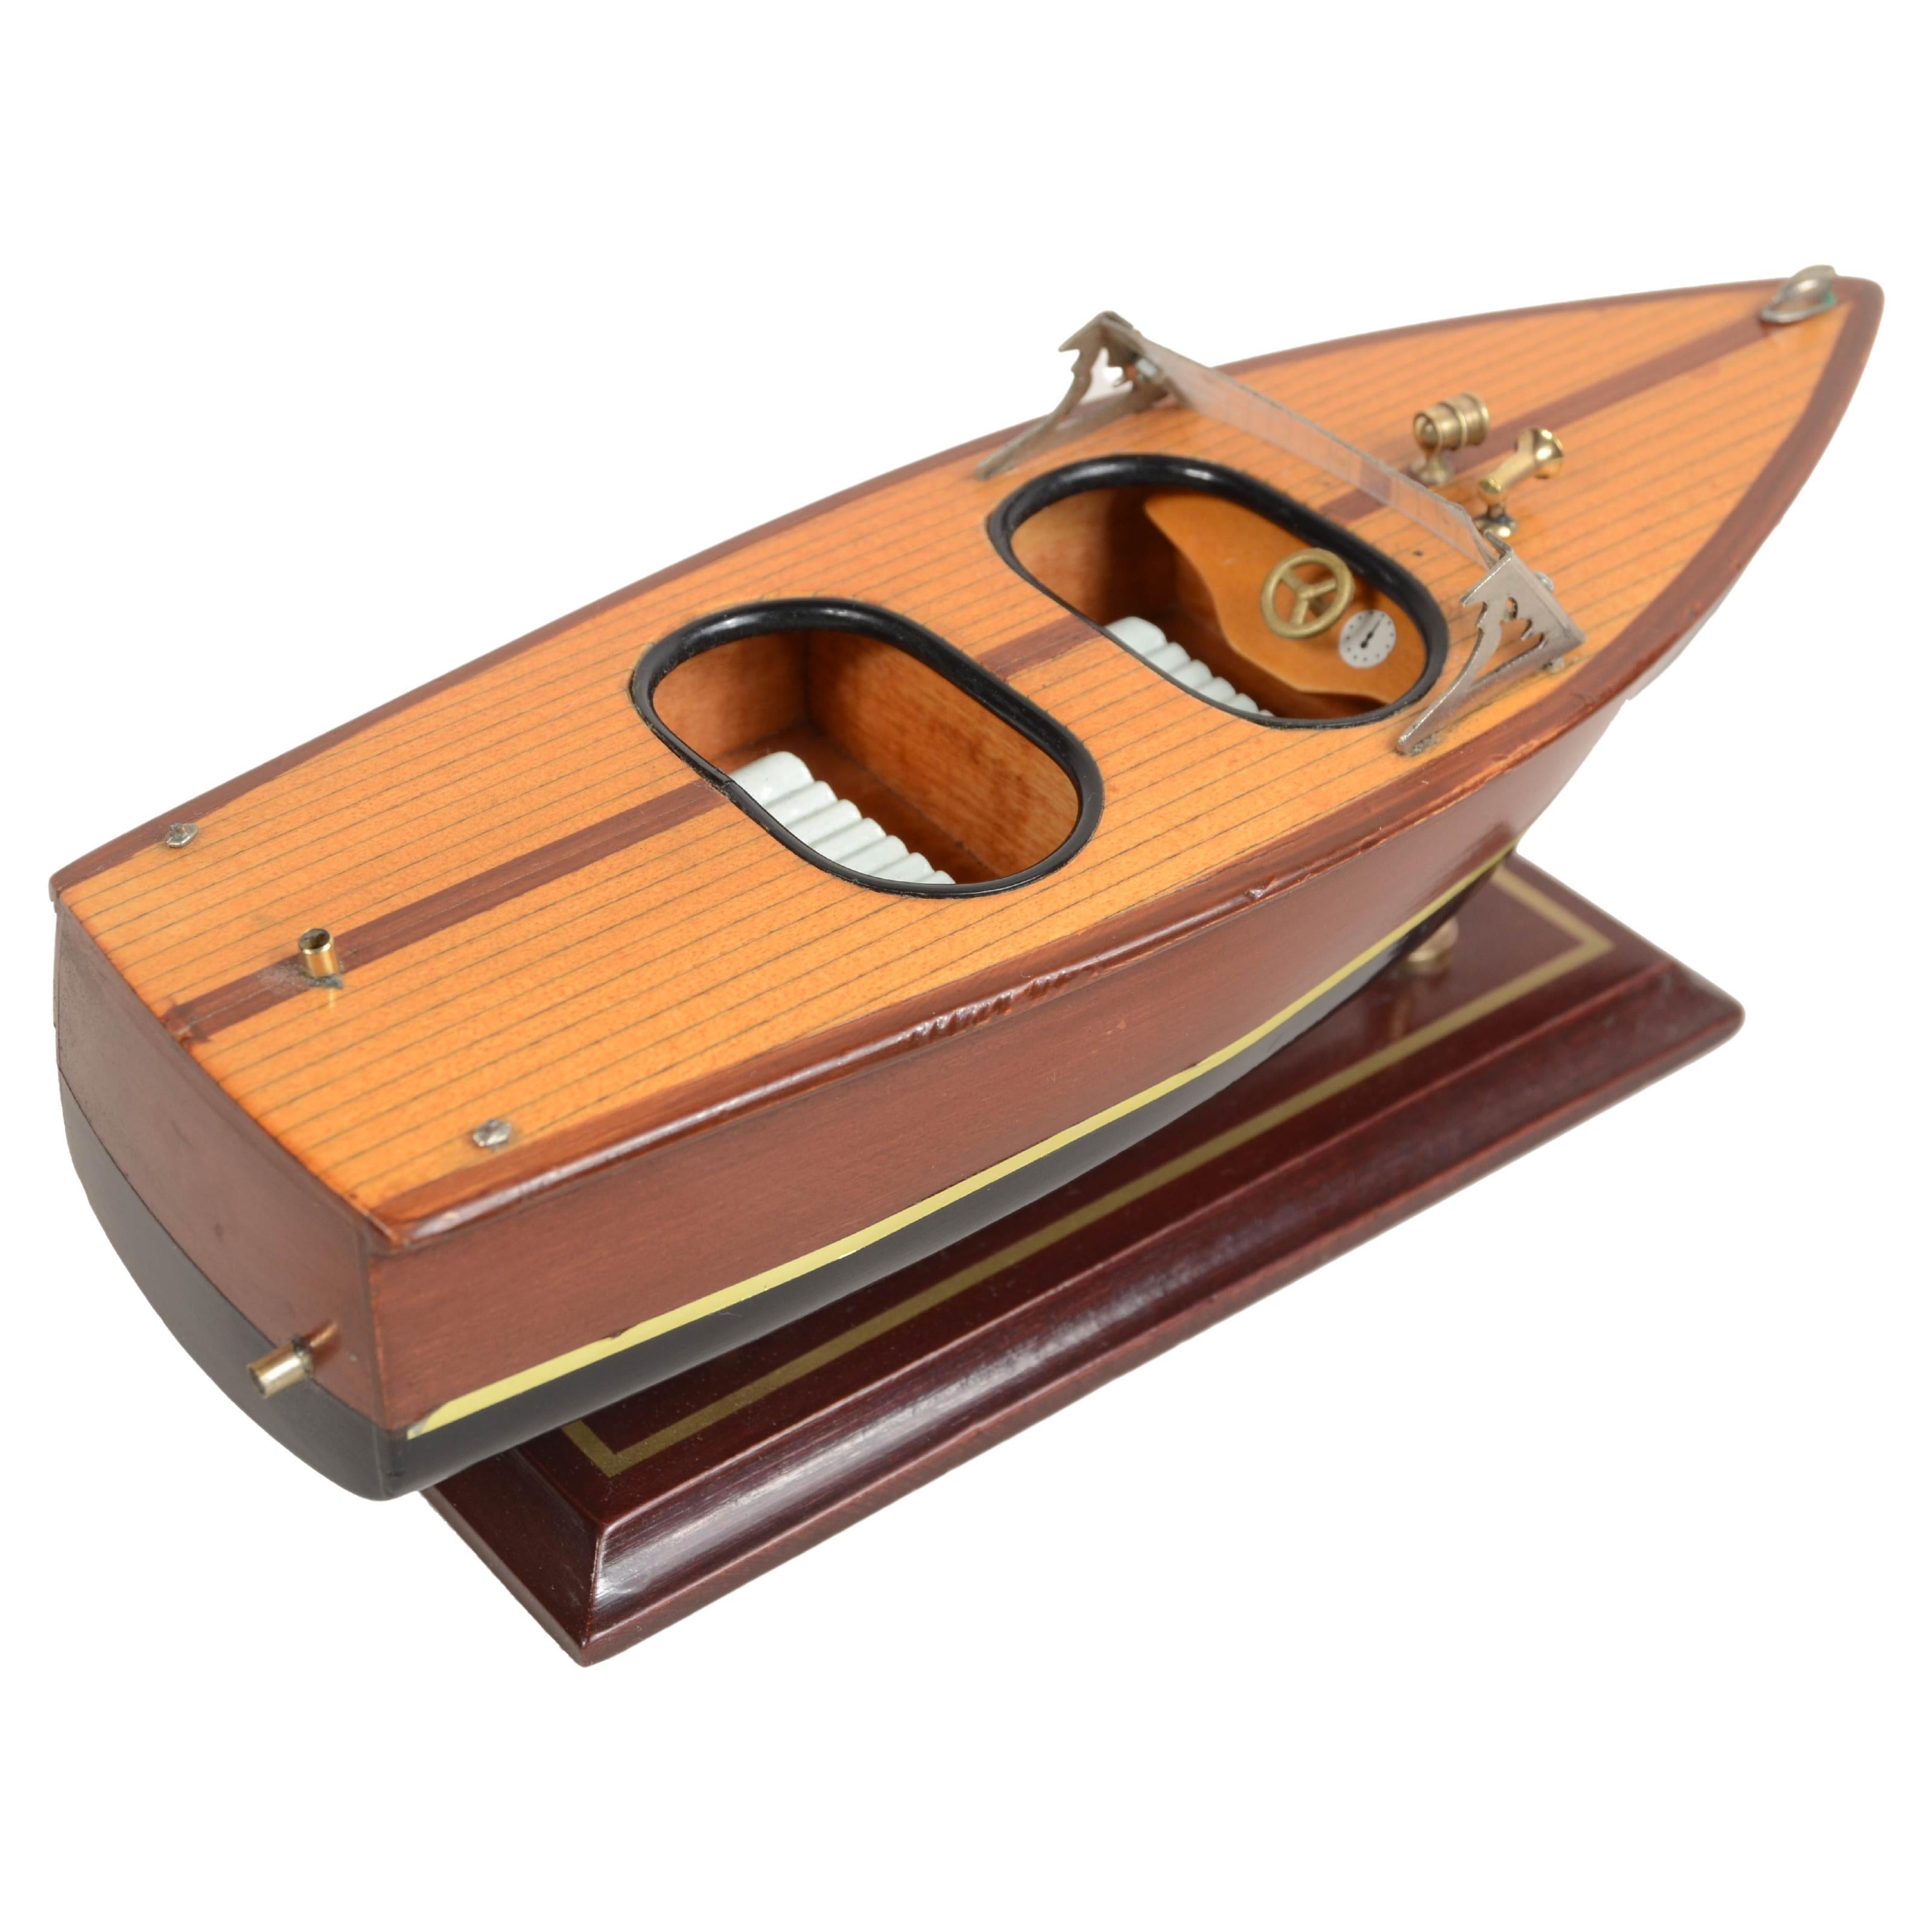 Scale model of an Italian motorboat from the 1950s For Sale